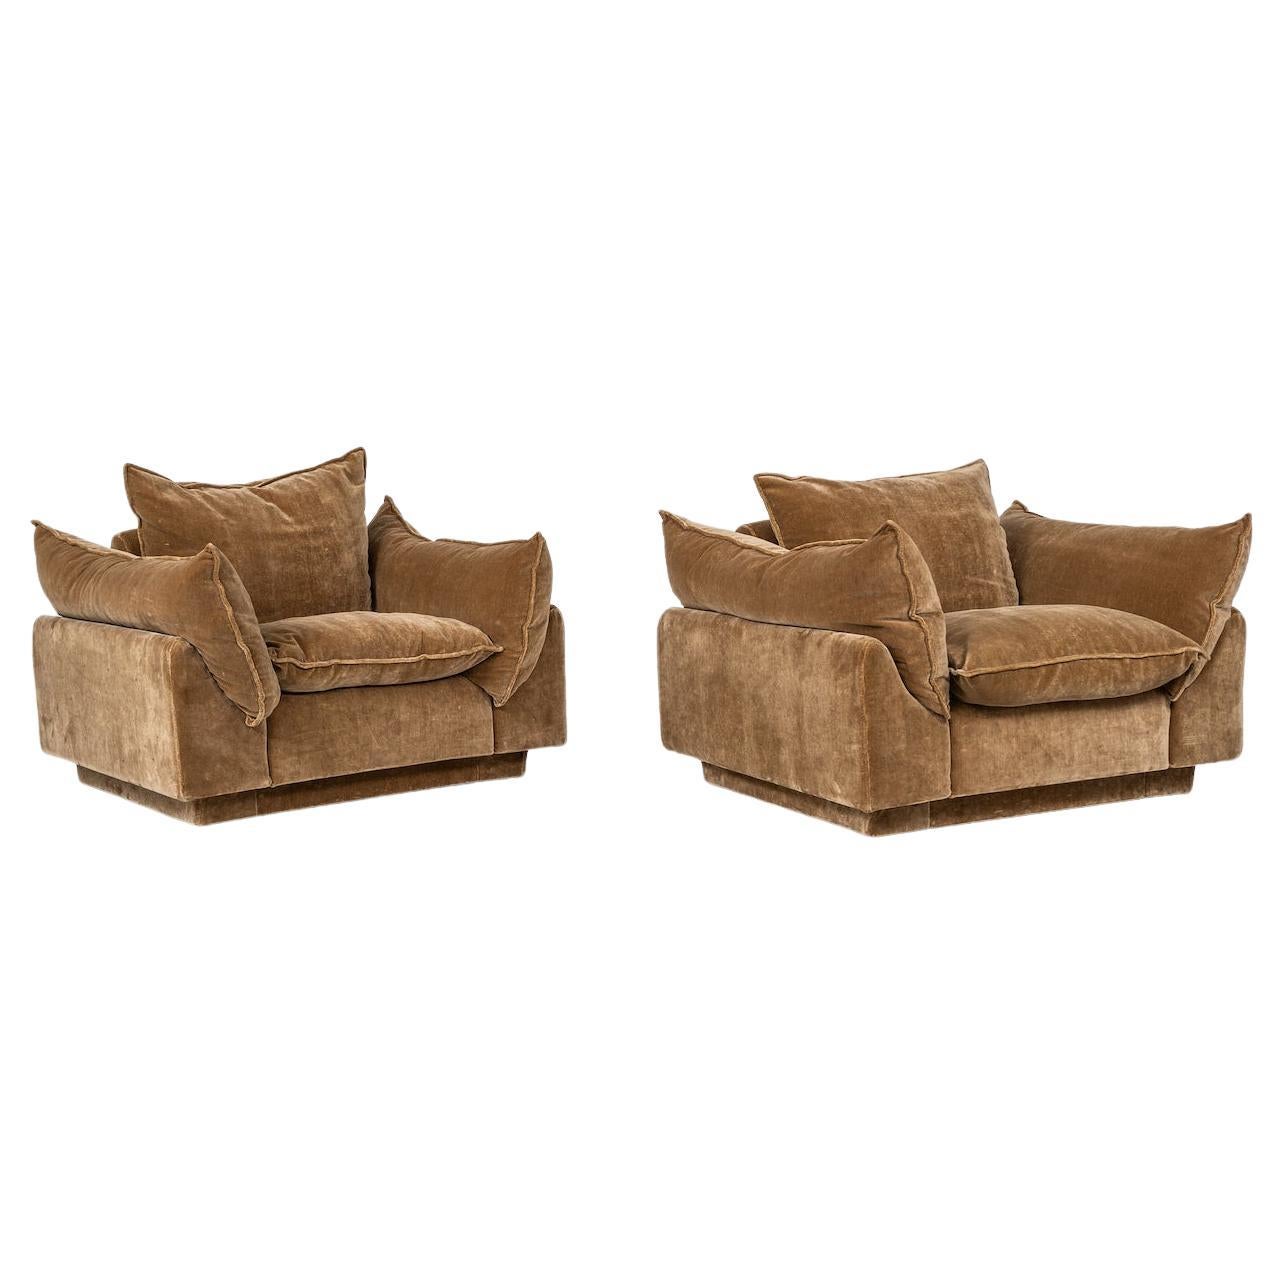  Pair of Armchairs "Cado" by Gunnar Gravesen and David Lewis Divano for ICF 